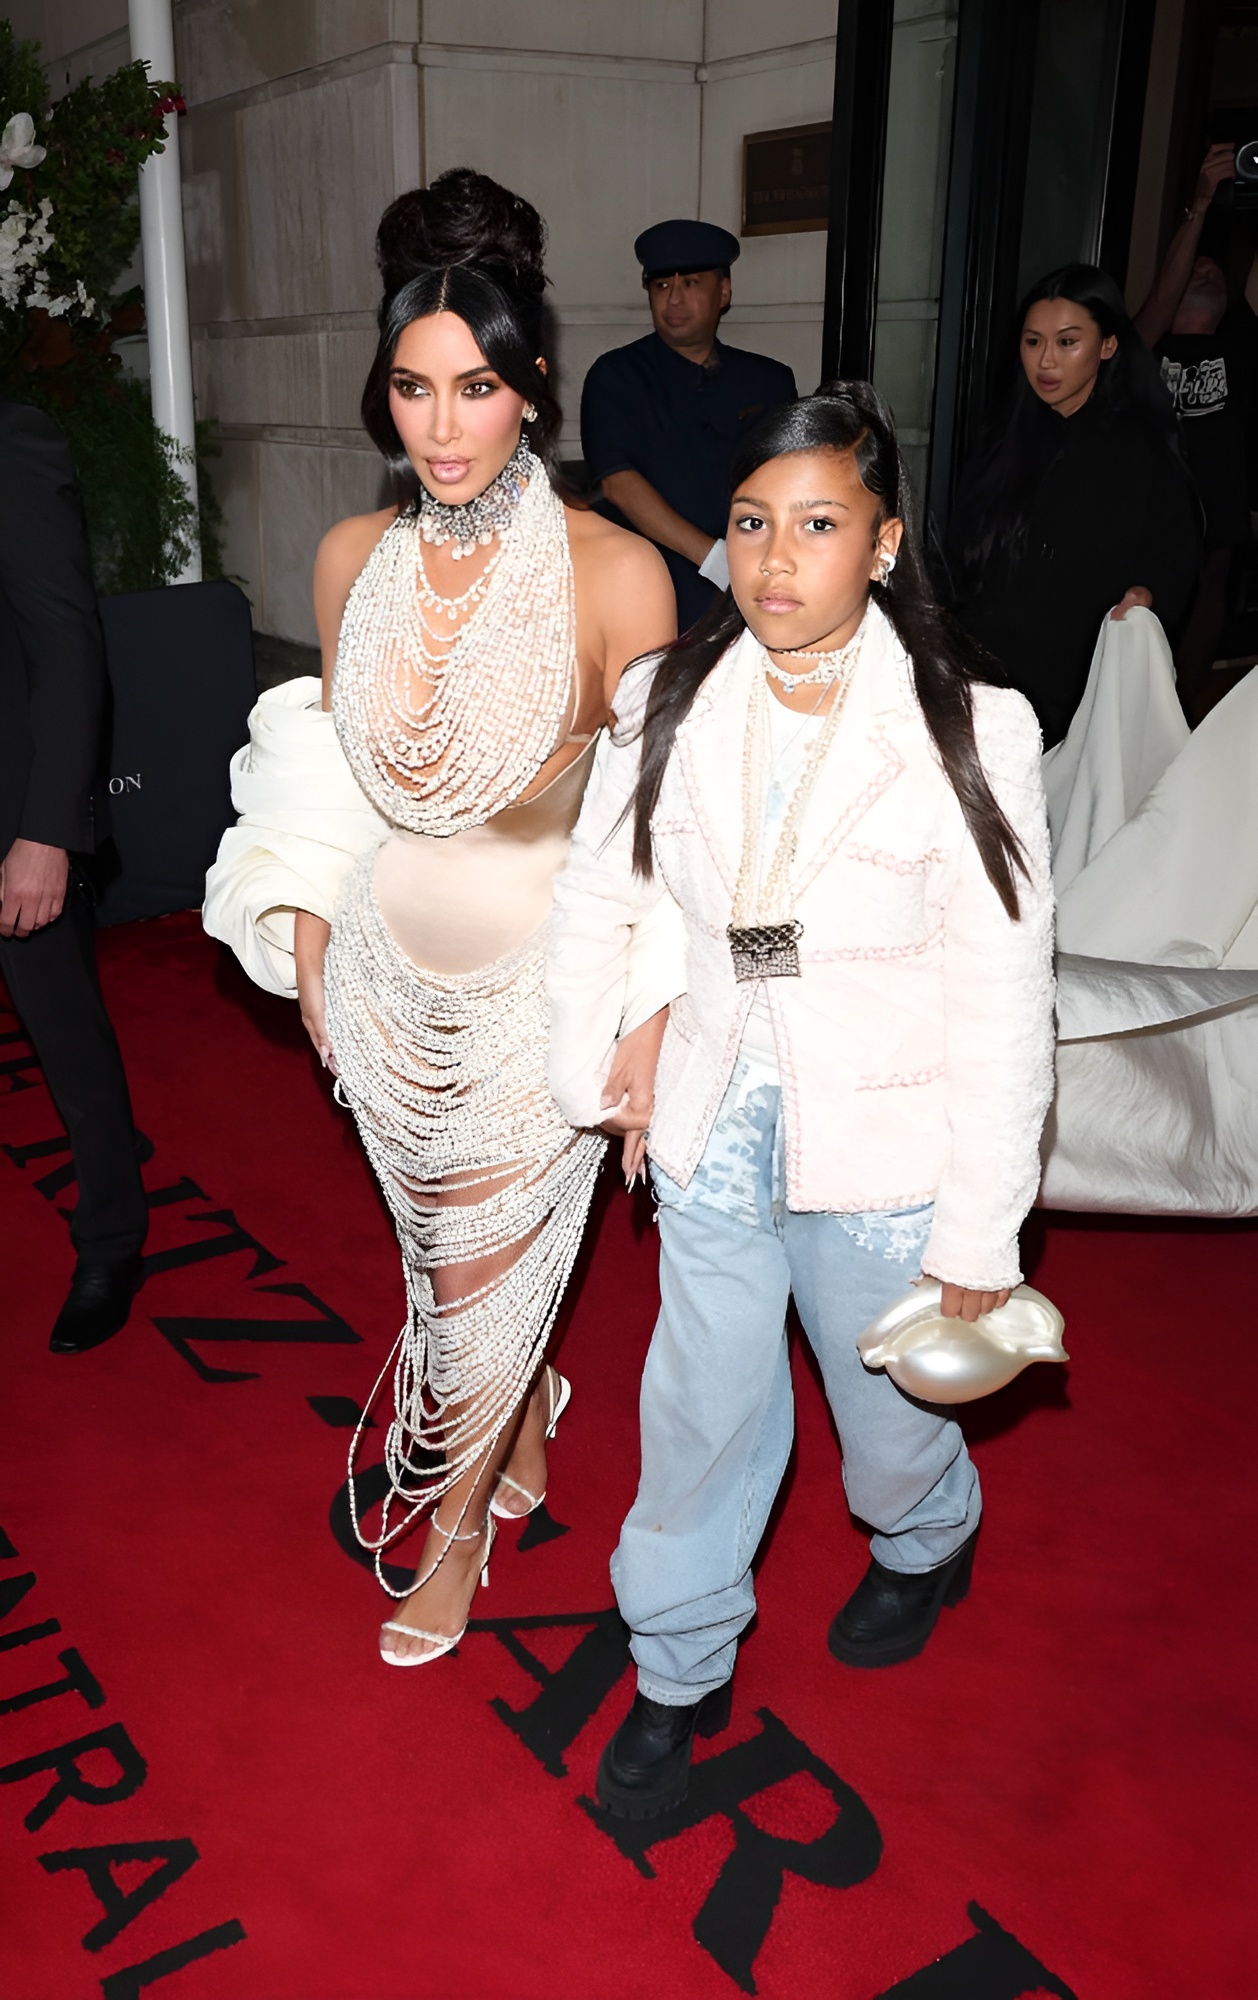 likhoa kim kardashian s daughter north west suddenly became a new fashion icon when she personally designed items for her mother and aunt kendall to attend high profile events 65620ee8413ca Kim Kardashian's Daughter, North West, Suddenly Became A New Fashion Icon When She Personally Designed Items For Her Mother And Aunt Kendall To Attend High-profile Events.